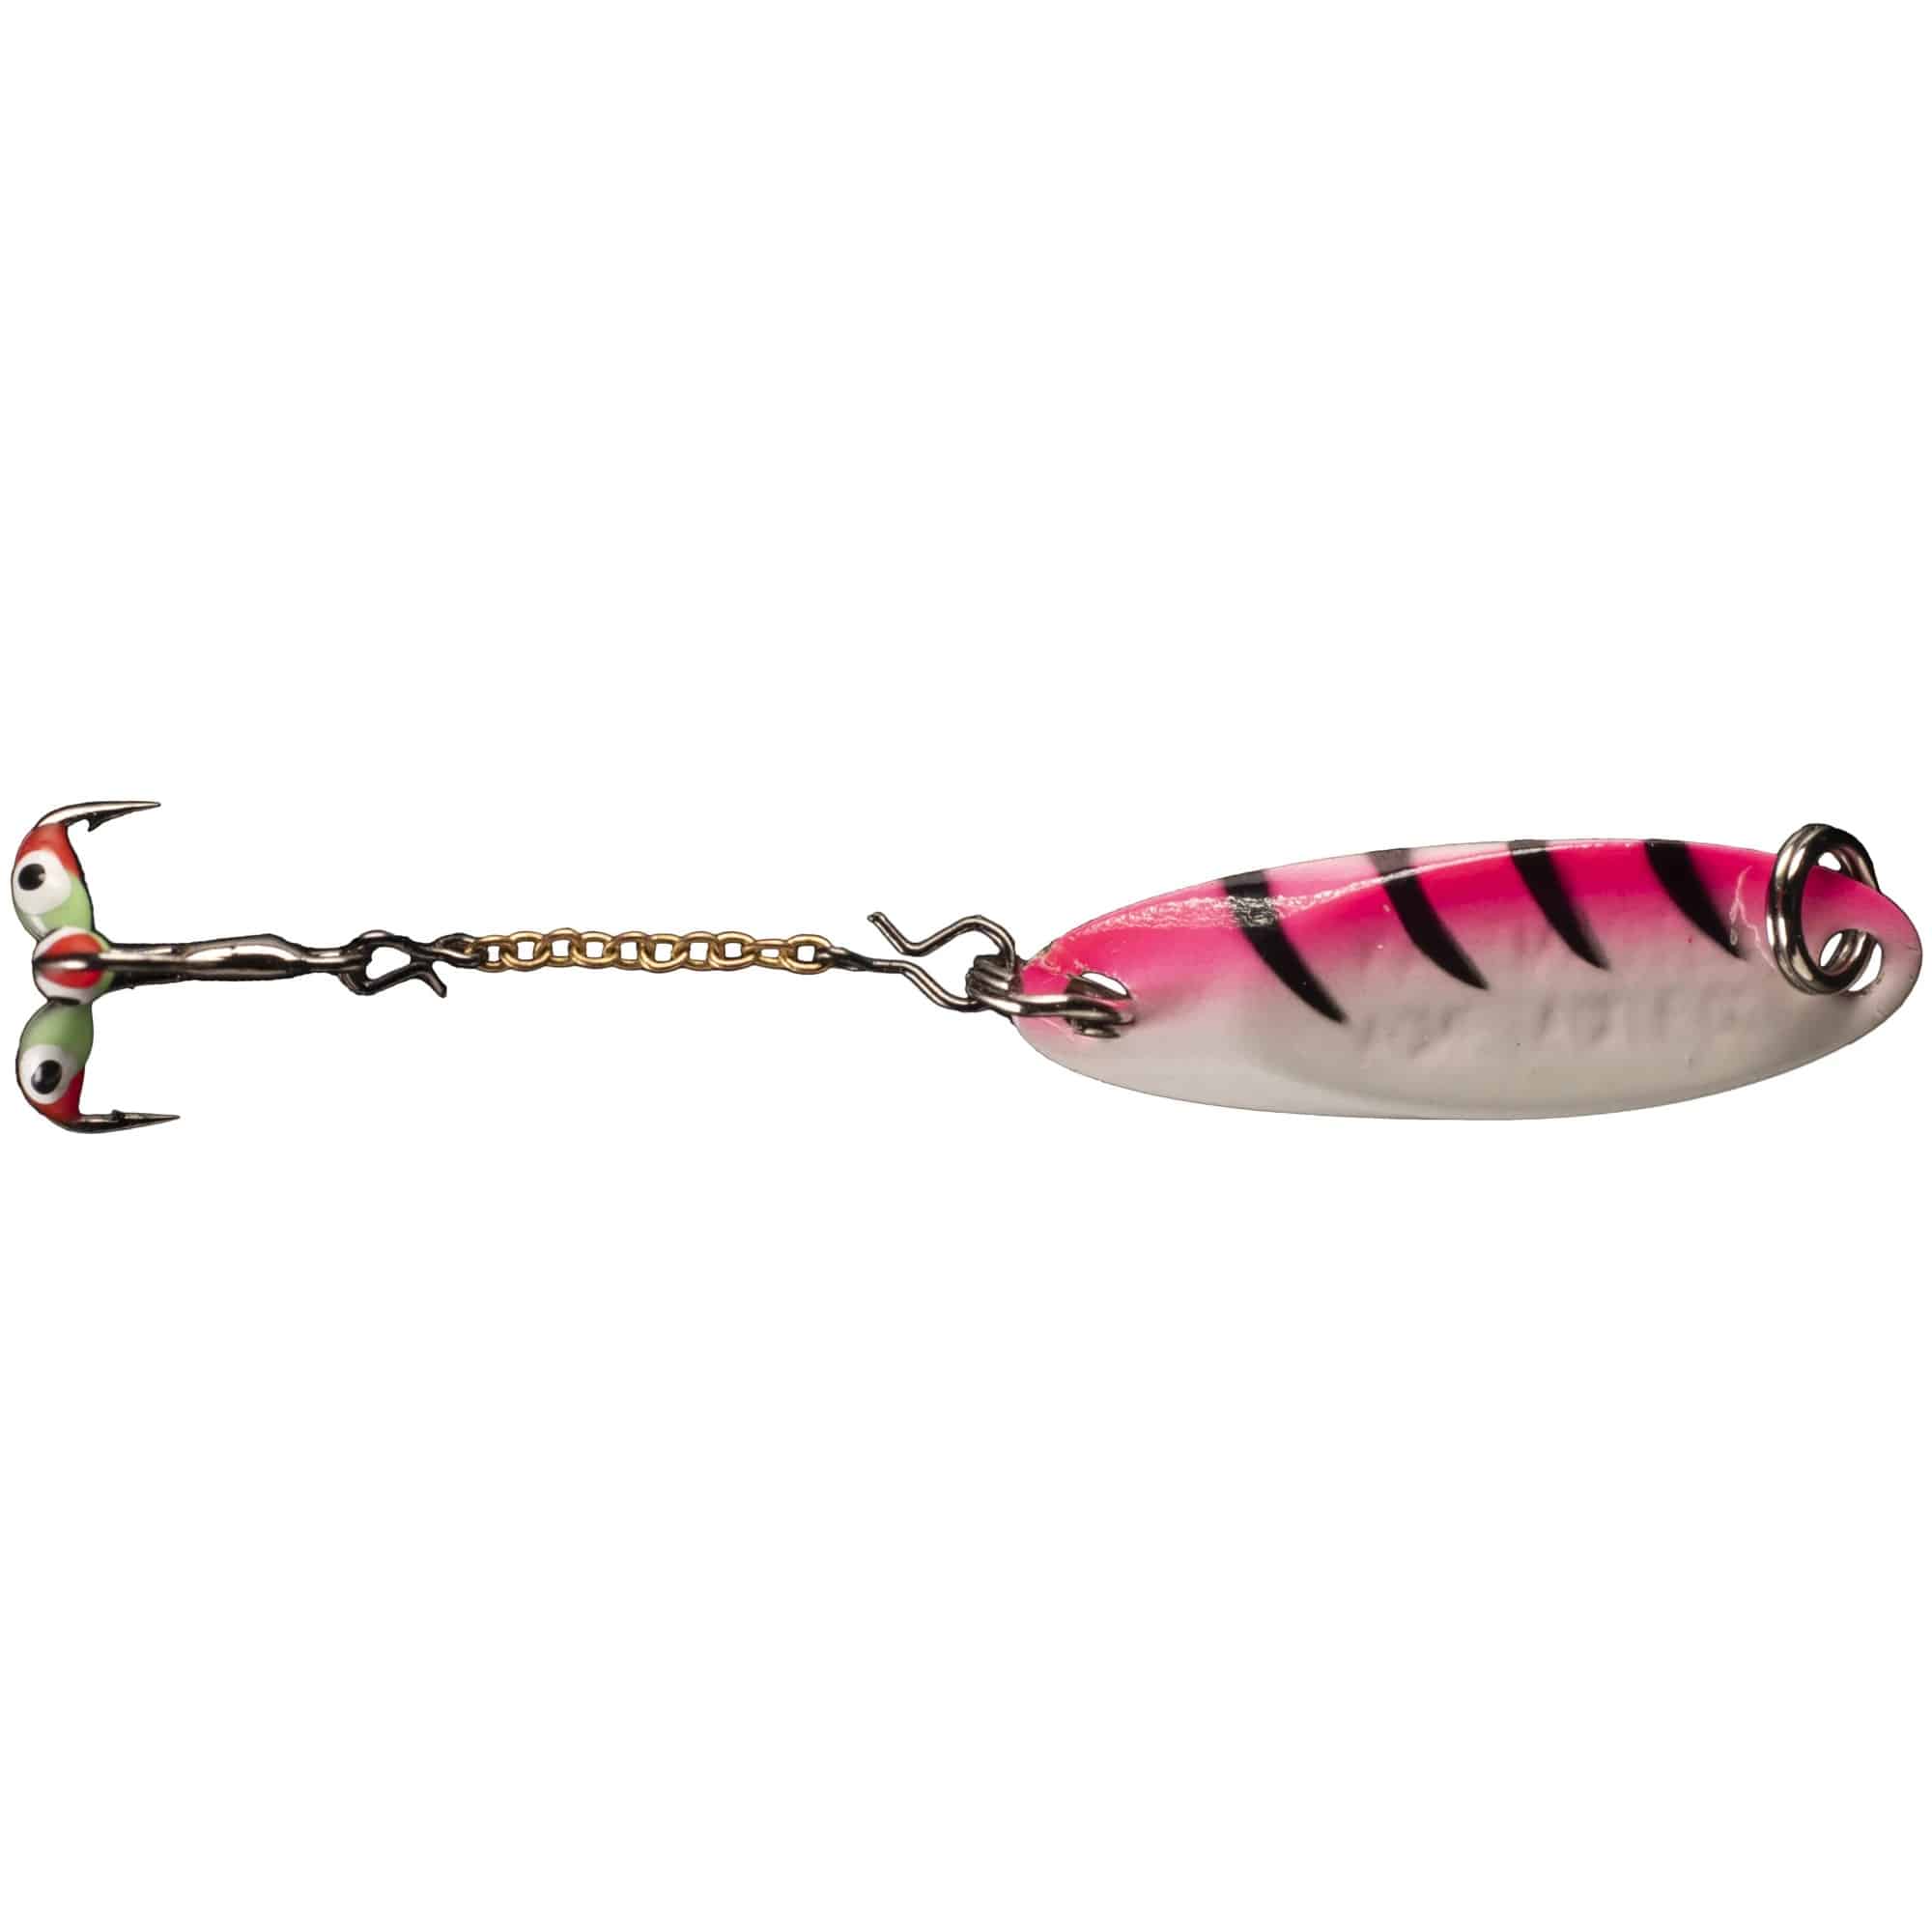 Acme Tackle D-Chain Kastmaster Glow Pink